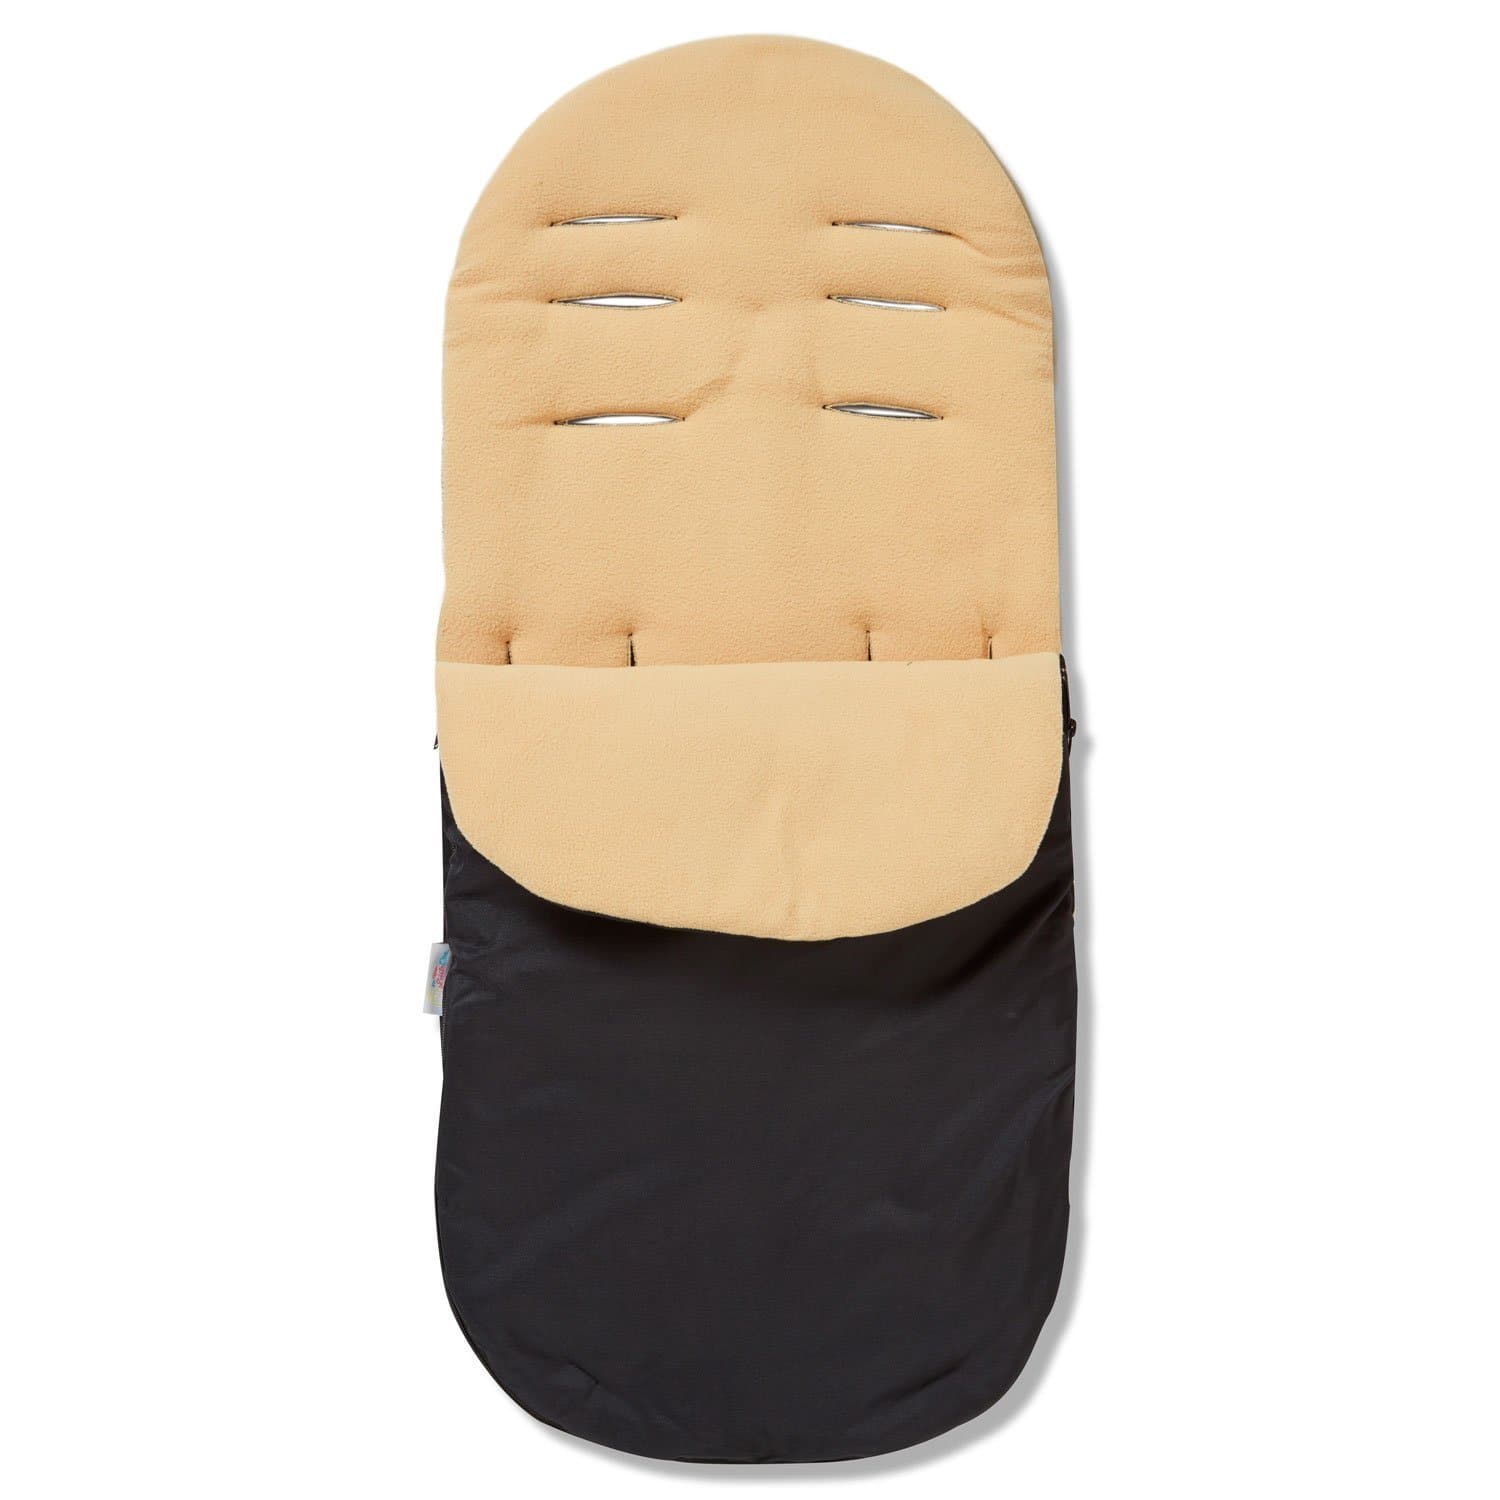 Footmuff / Cosy Toes Compatible with Kiddy - Sand / Fits All Models | For Your Little One